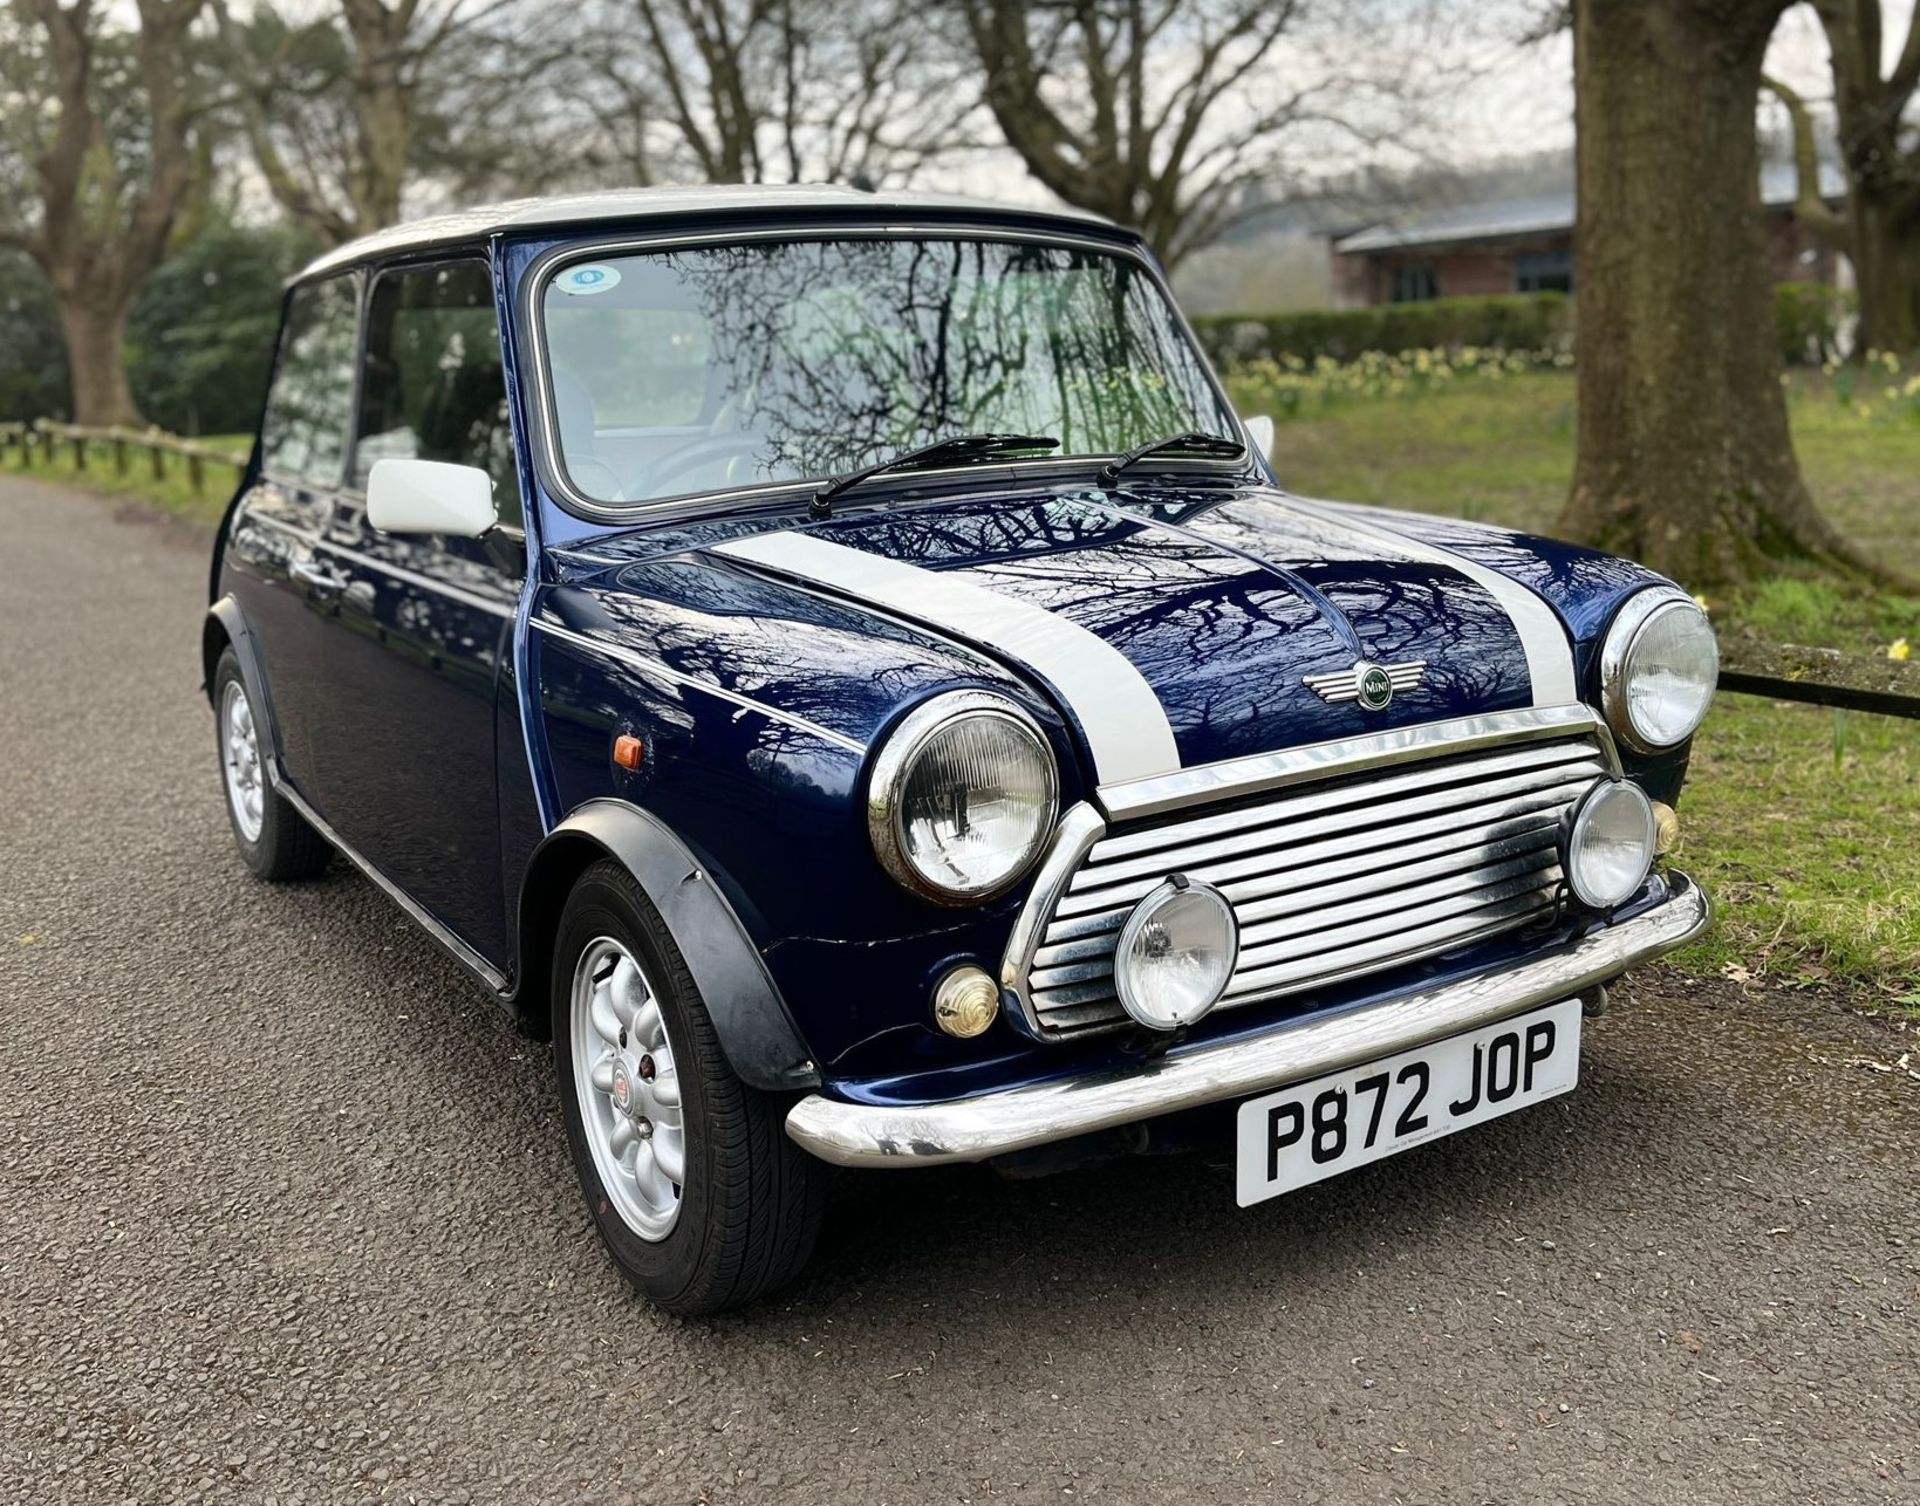 1997 MINI COOPER MPI Registration Number: P872 JOP Chassis Number: SAXXNNAZEBD141820 Recorded - Image 2 of 13